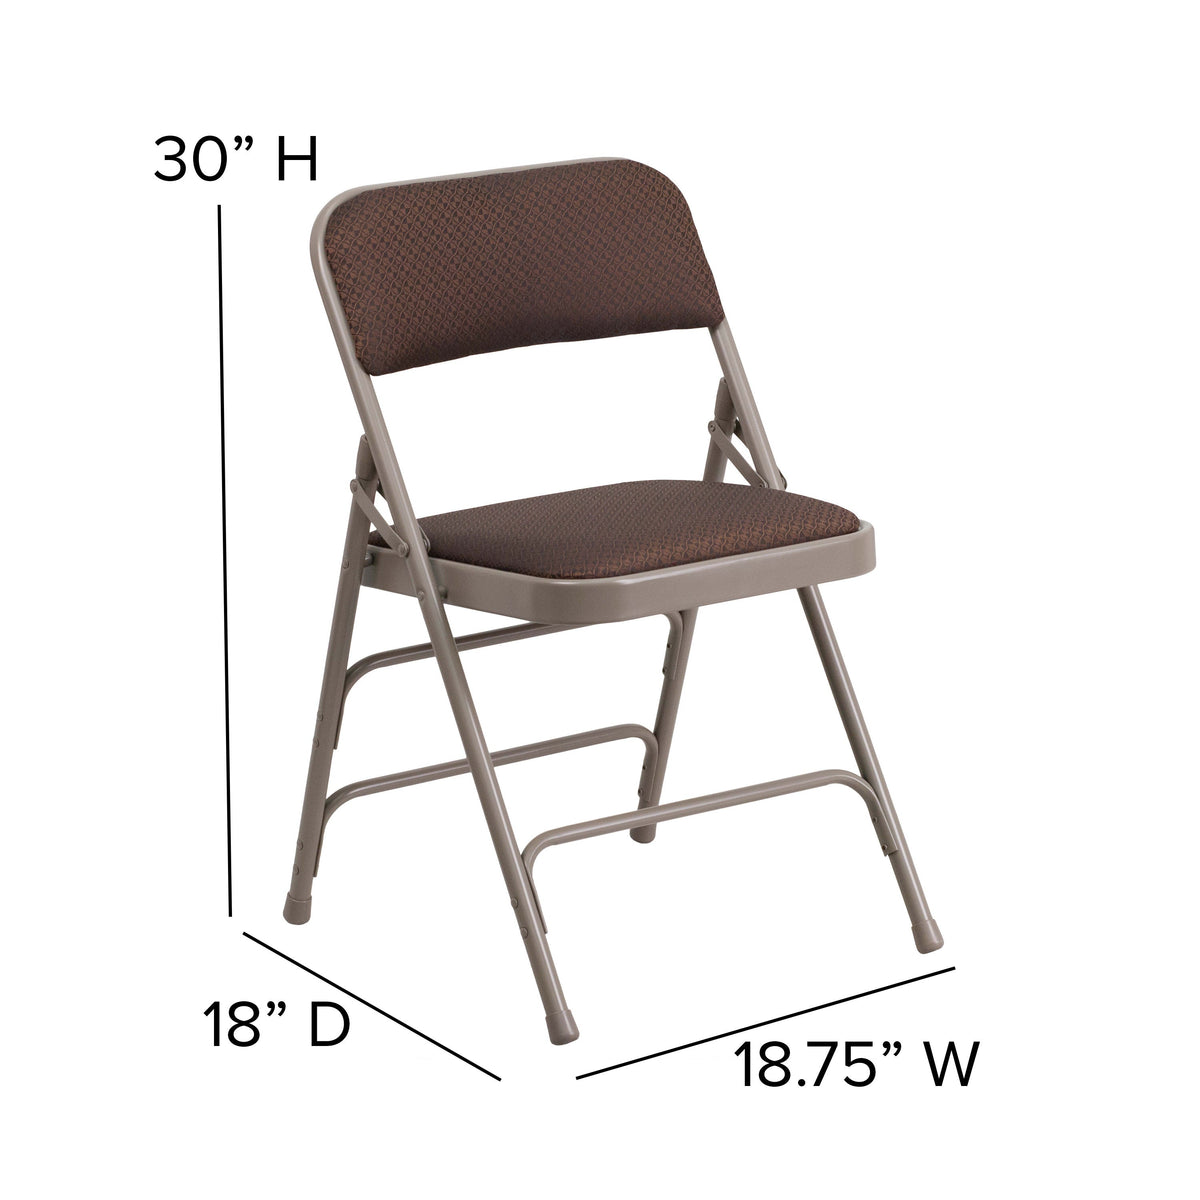 Brown Patterned |#| Curved Triple Braced & Double Hinged Brown Patterned Fabric Metal Folding Chair